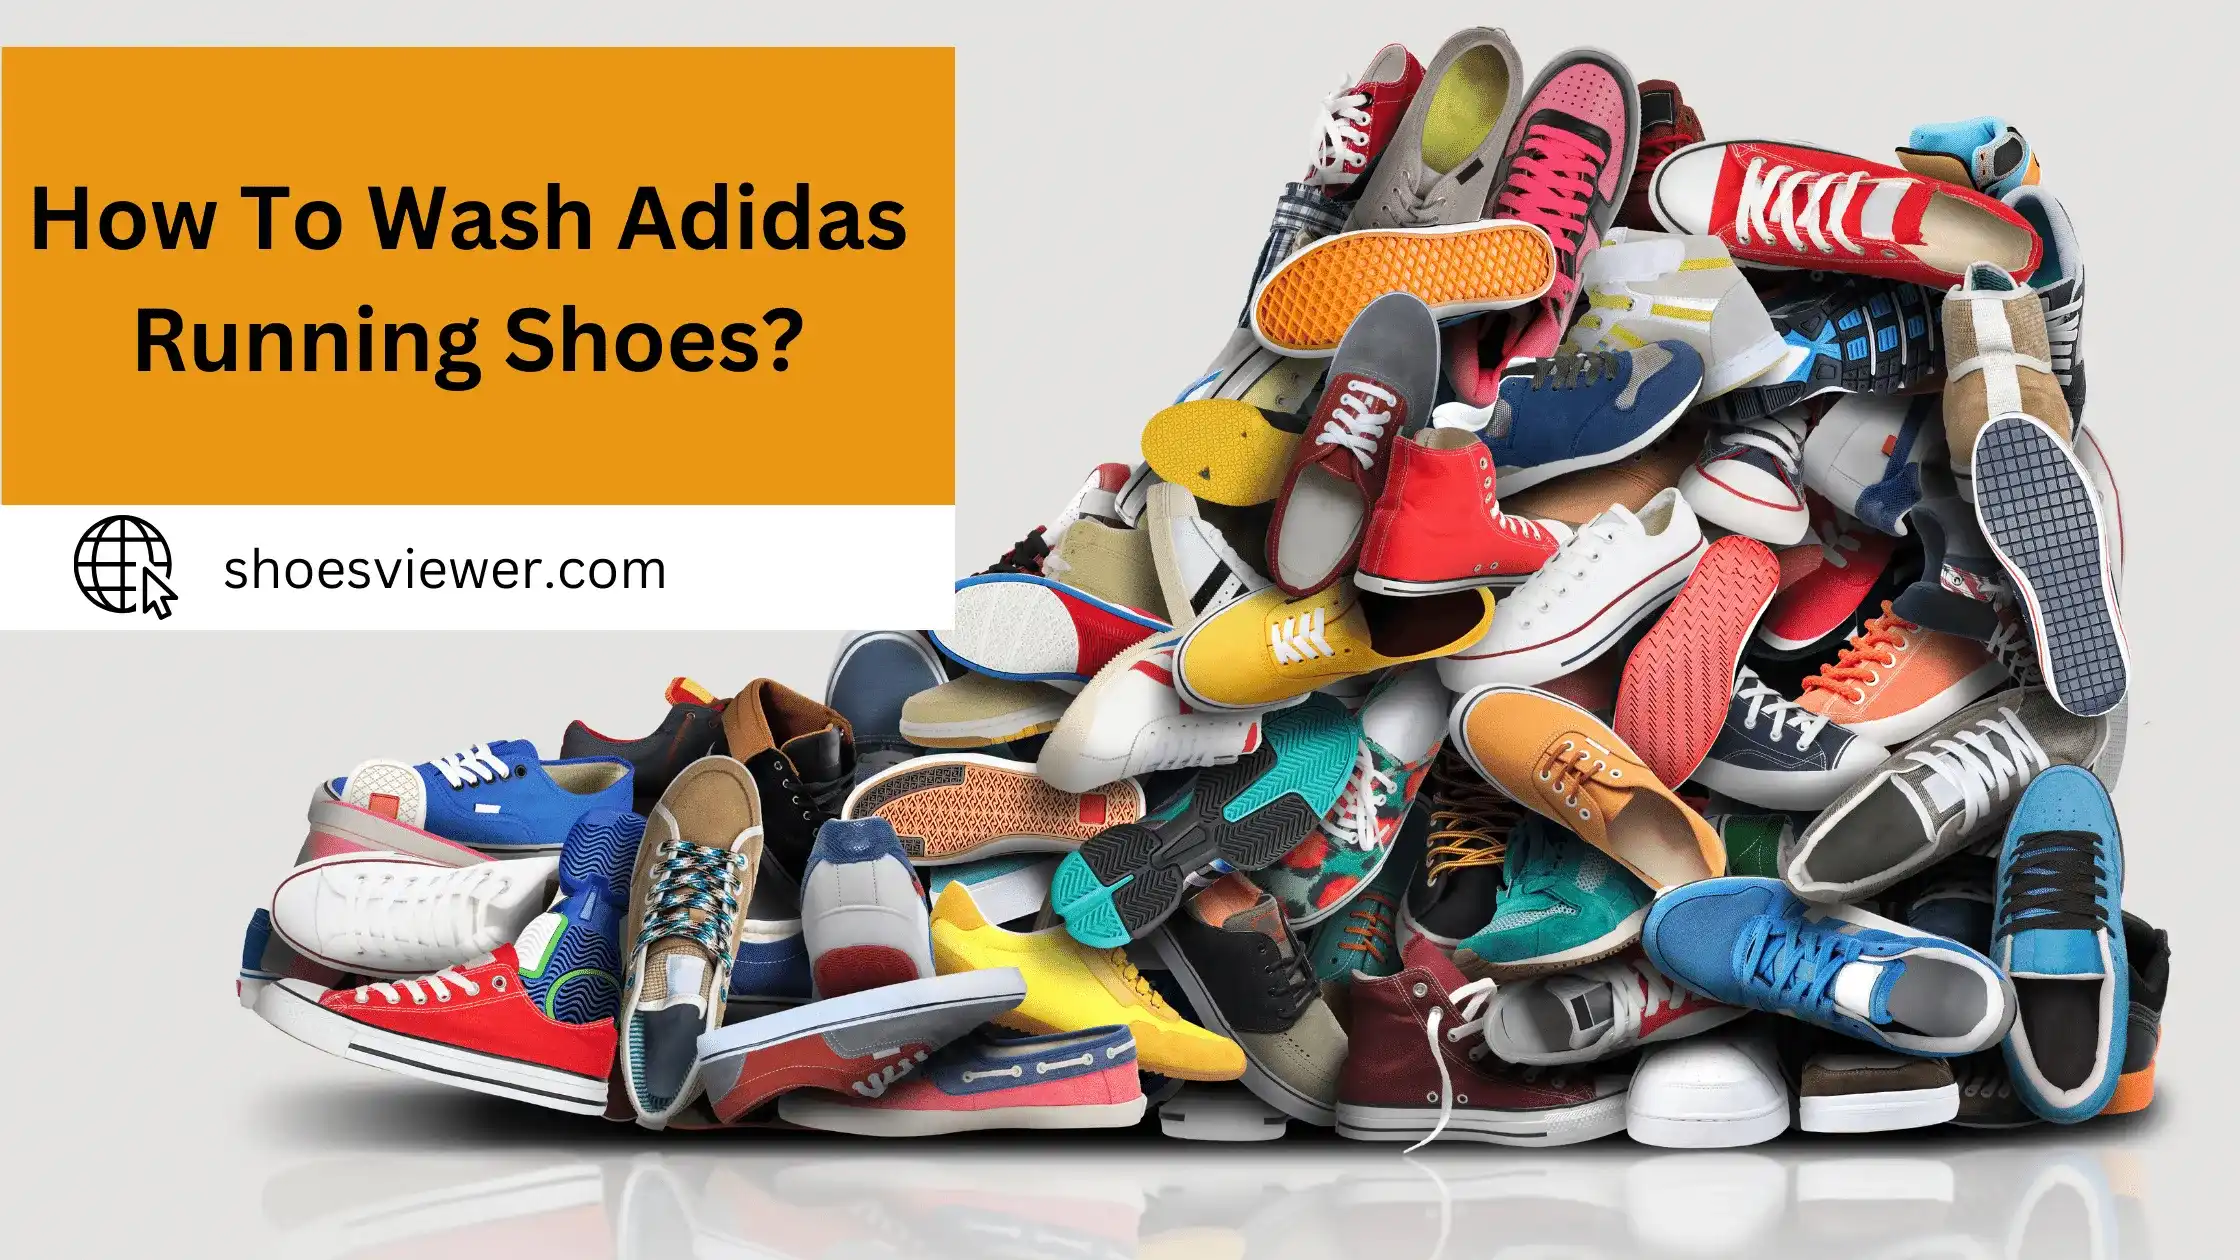 How To Wash Adidas Running Shoes? Cleaning Instructions